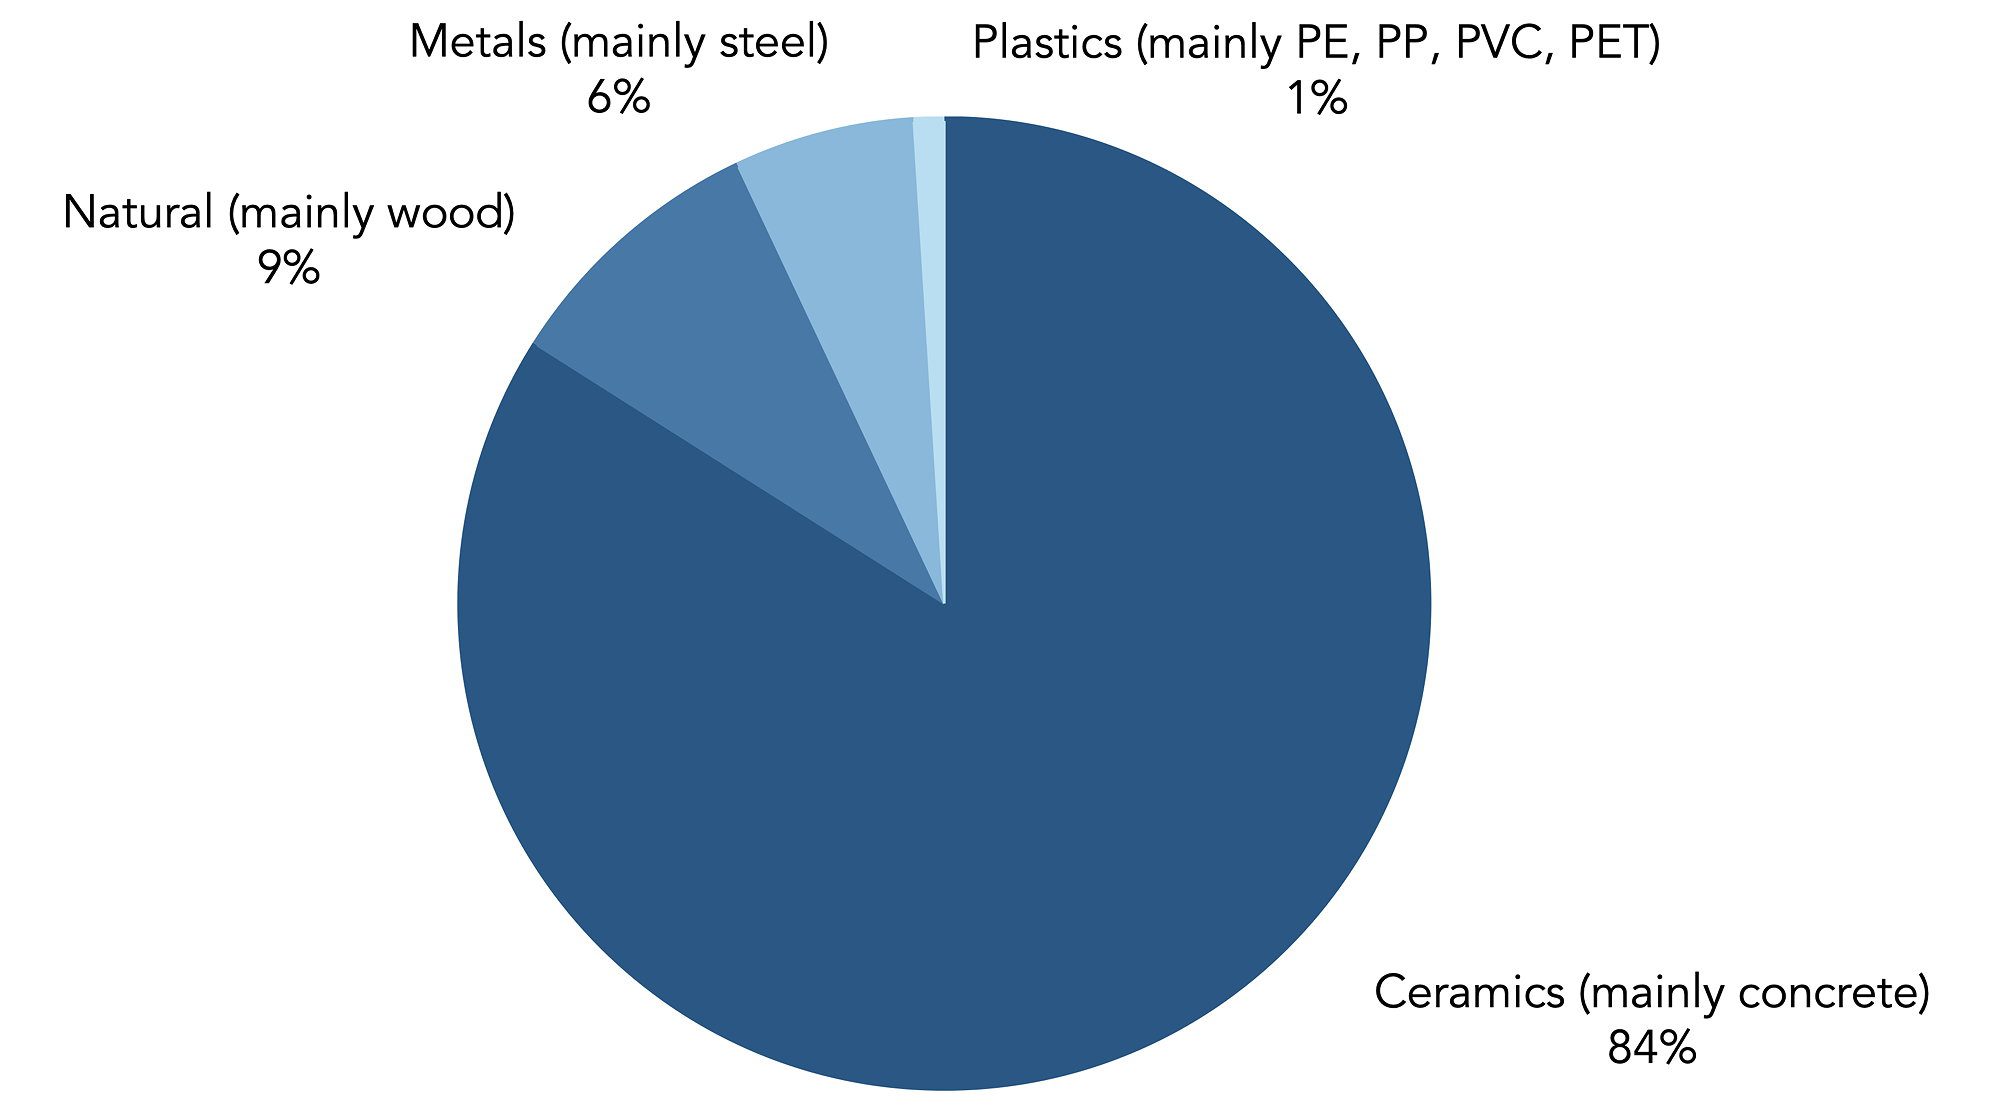 Global Materials Use Showing that Plastics Make up Just 1 Percent of the Total